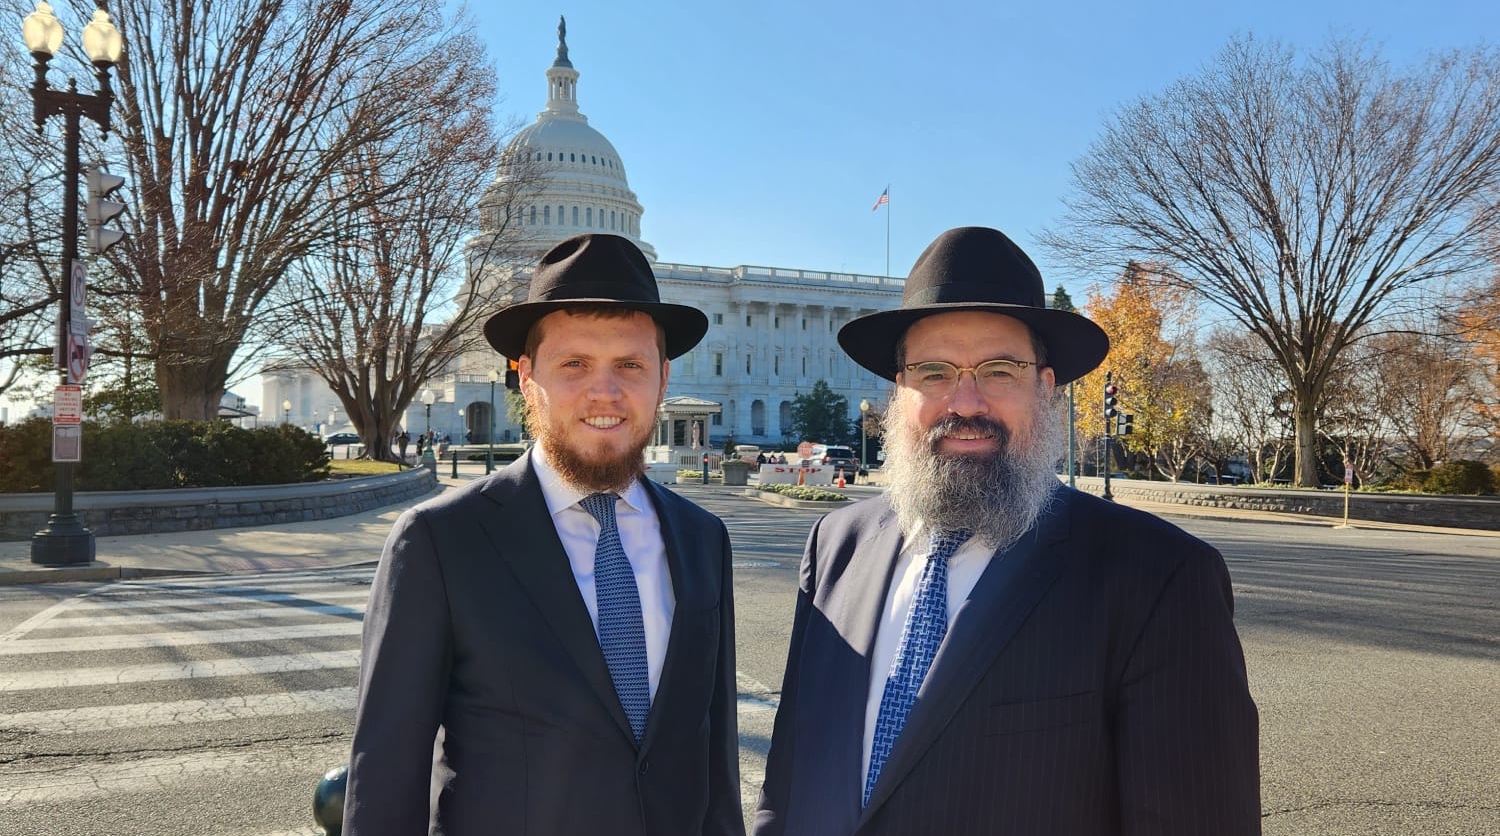 Rabbi Menachem Shemtov, <i>left</i>, poses with his father, Rabbi Levi Shemtov, in this undated photo at the U.S. Capitol.